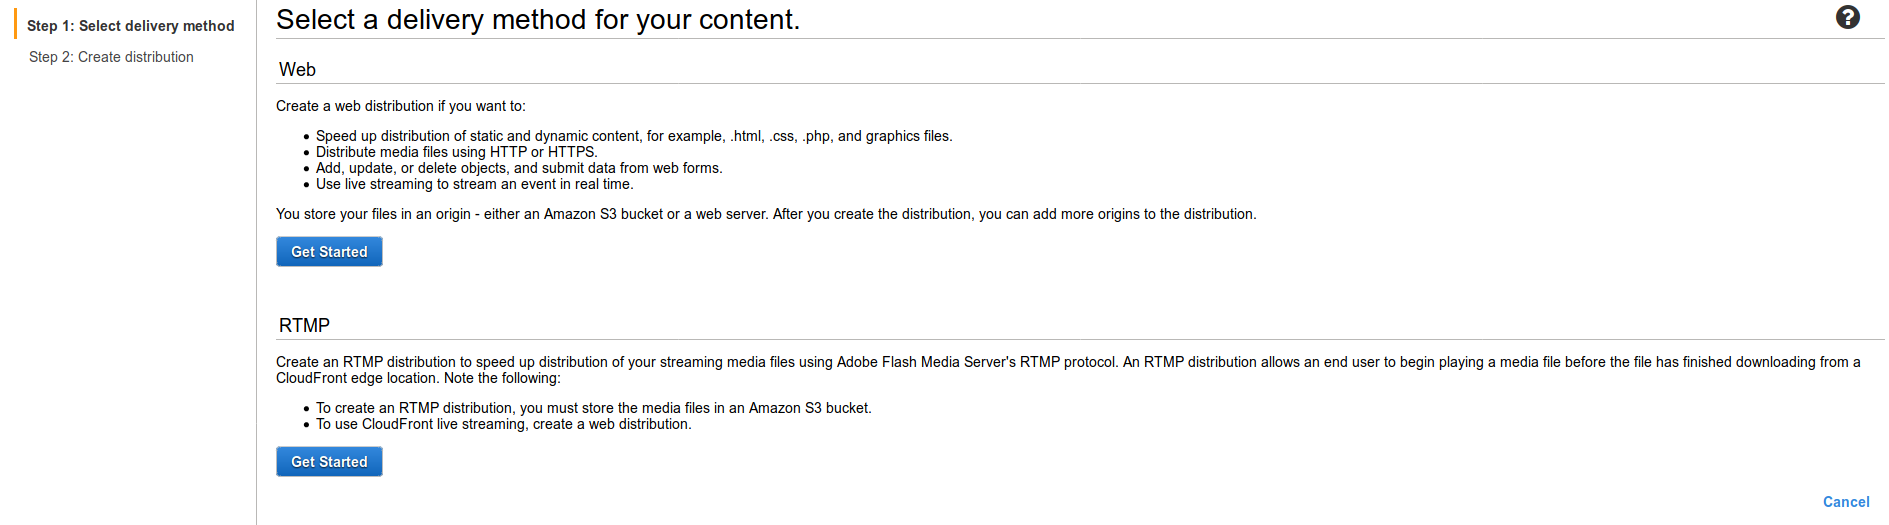 /media/aws/cloudfront-create-web-distribution.png